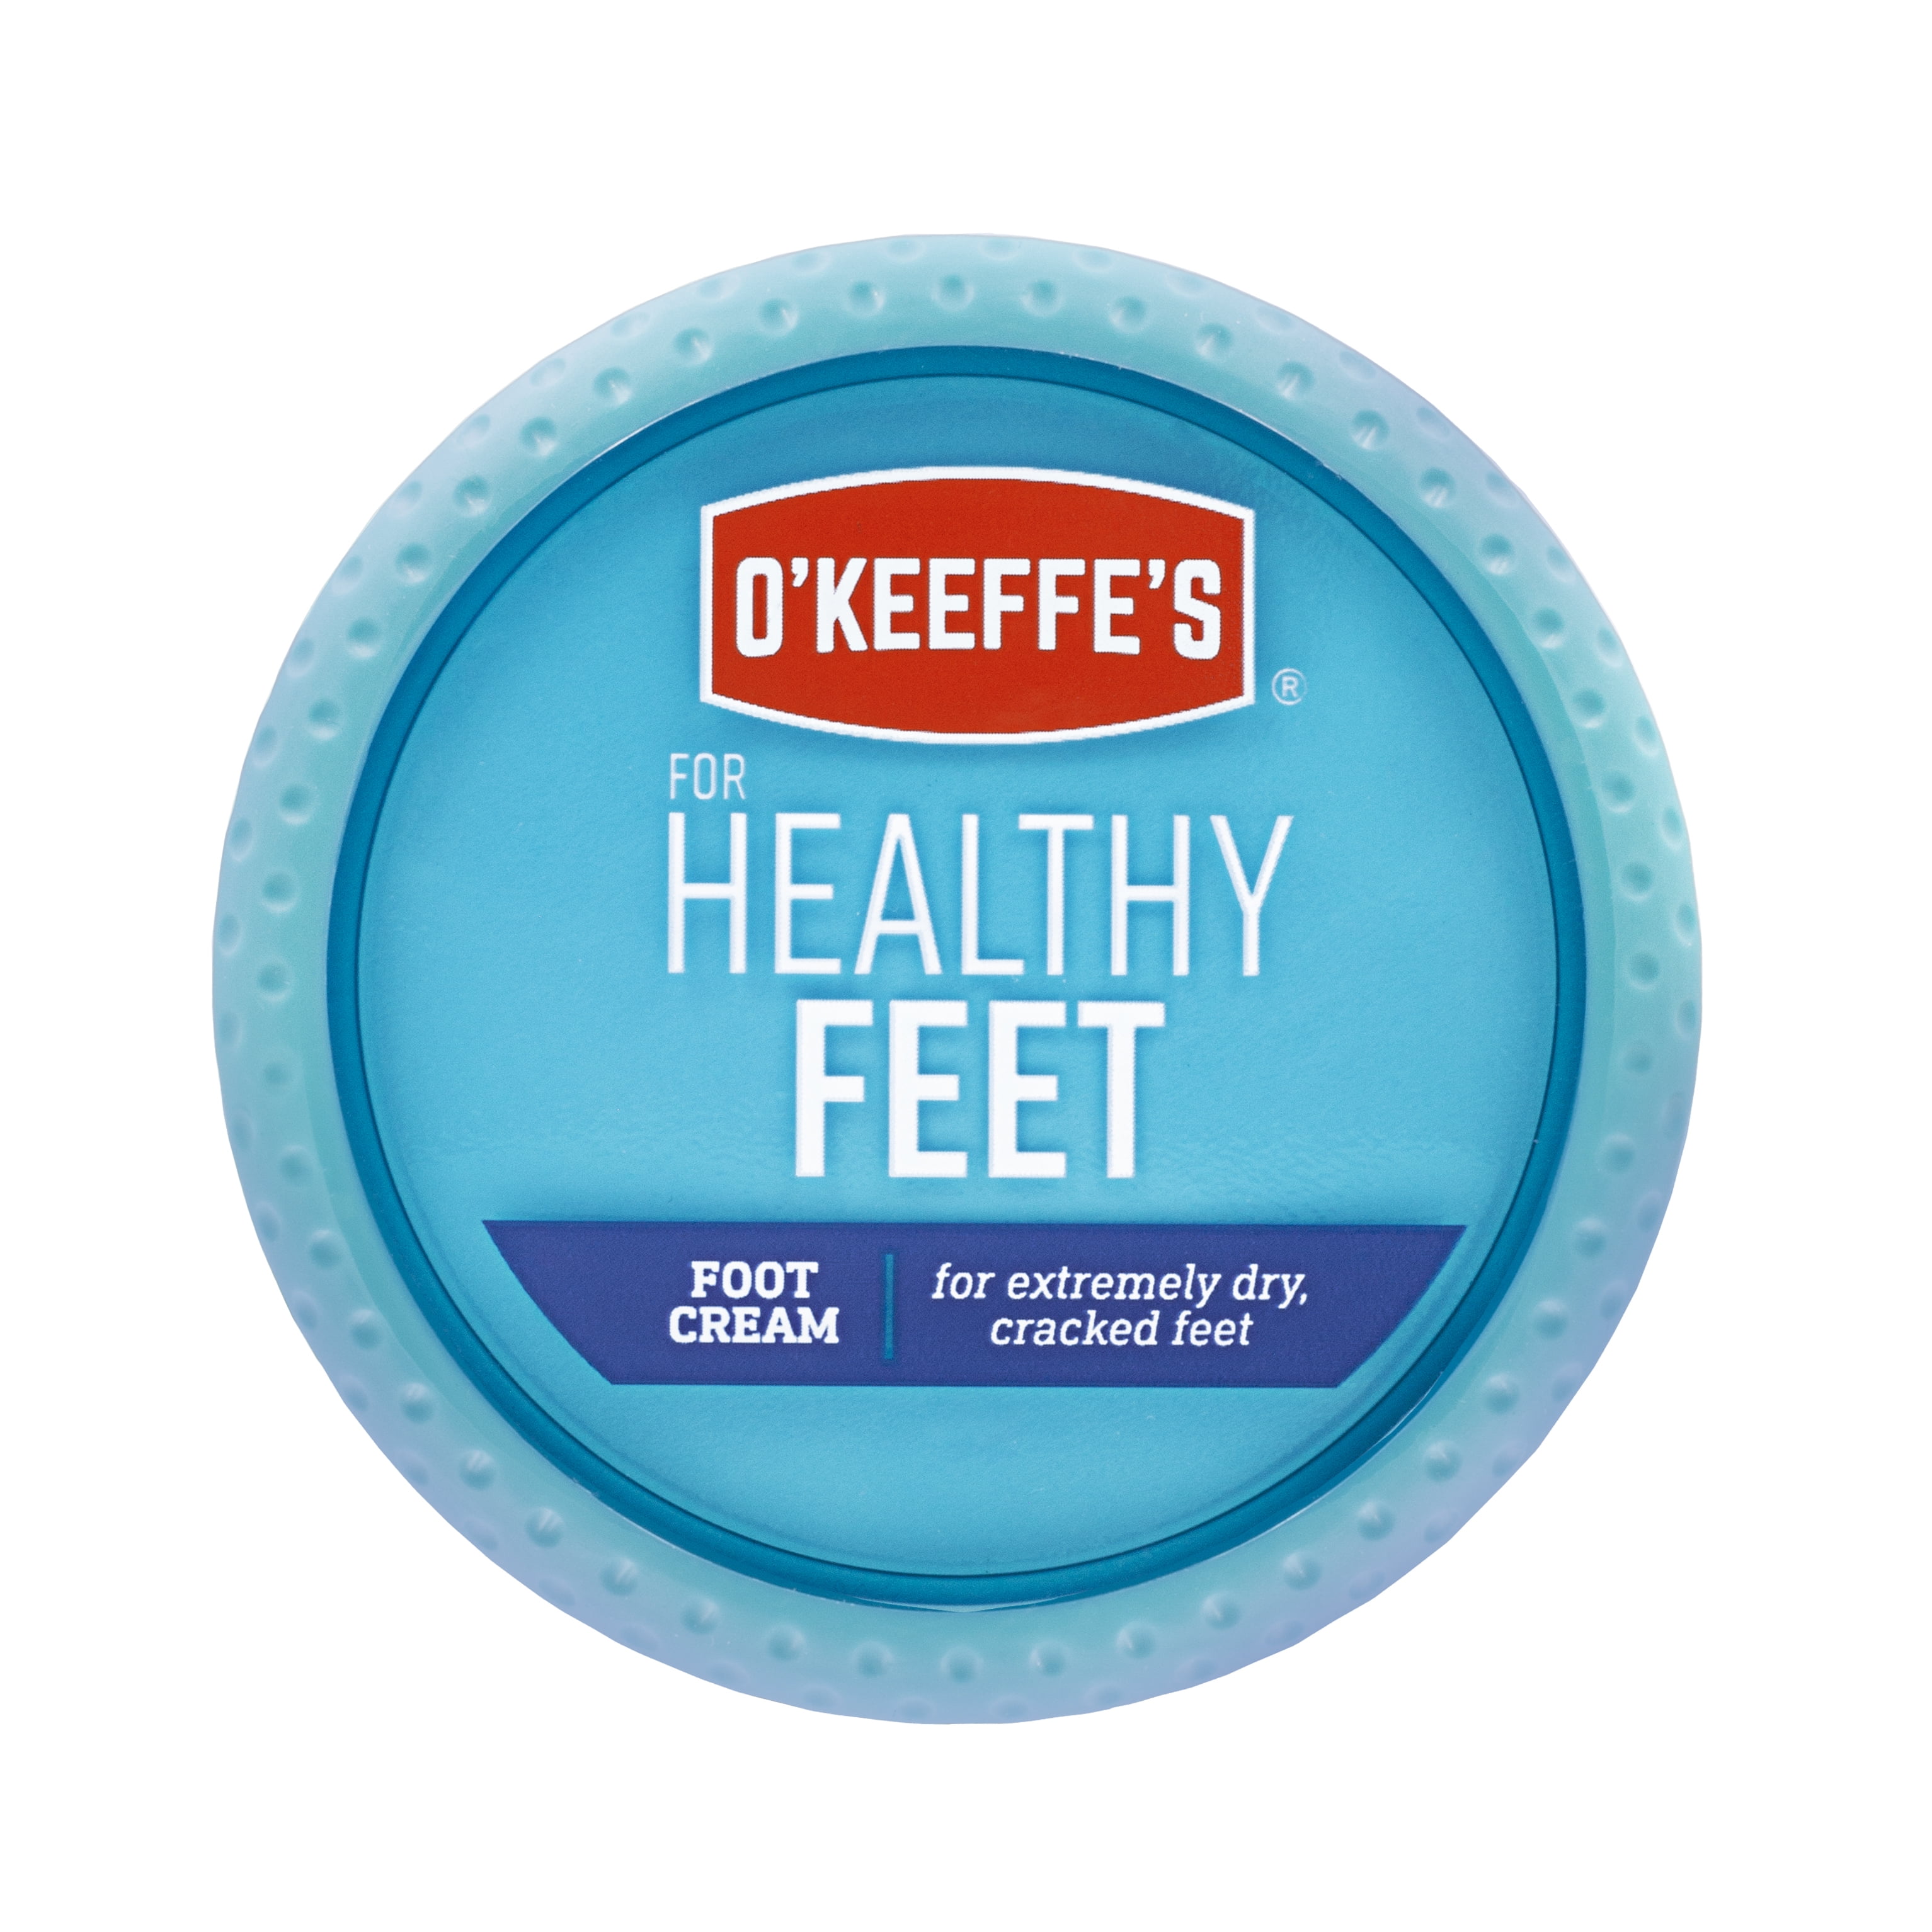 O'Keeffe's for Healthy Feet Cream (2.7 oz.) Jar for Extremely Dry, Cracked Feet